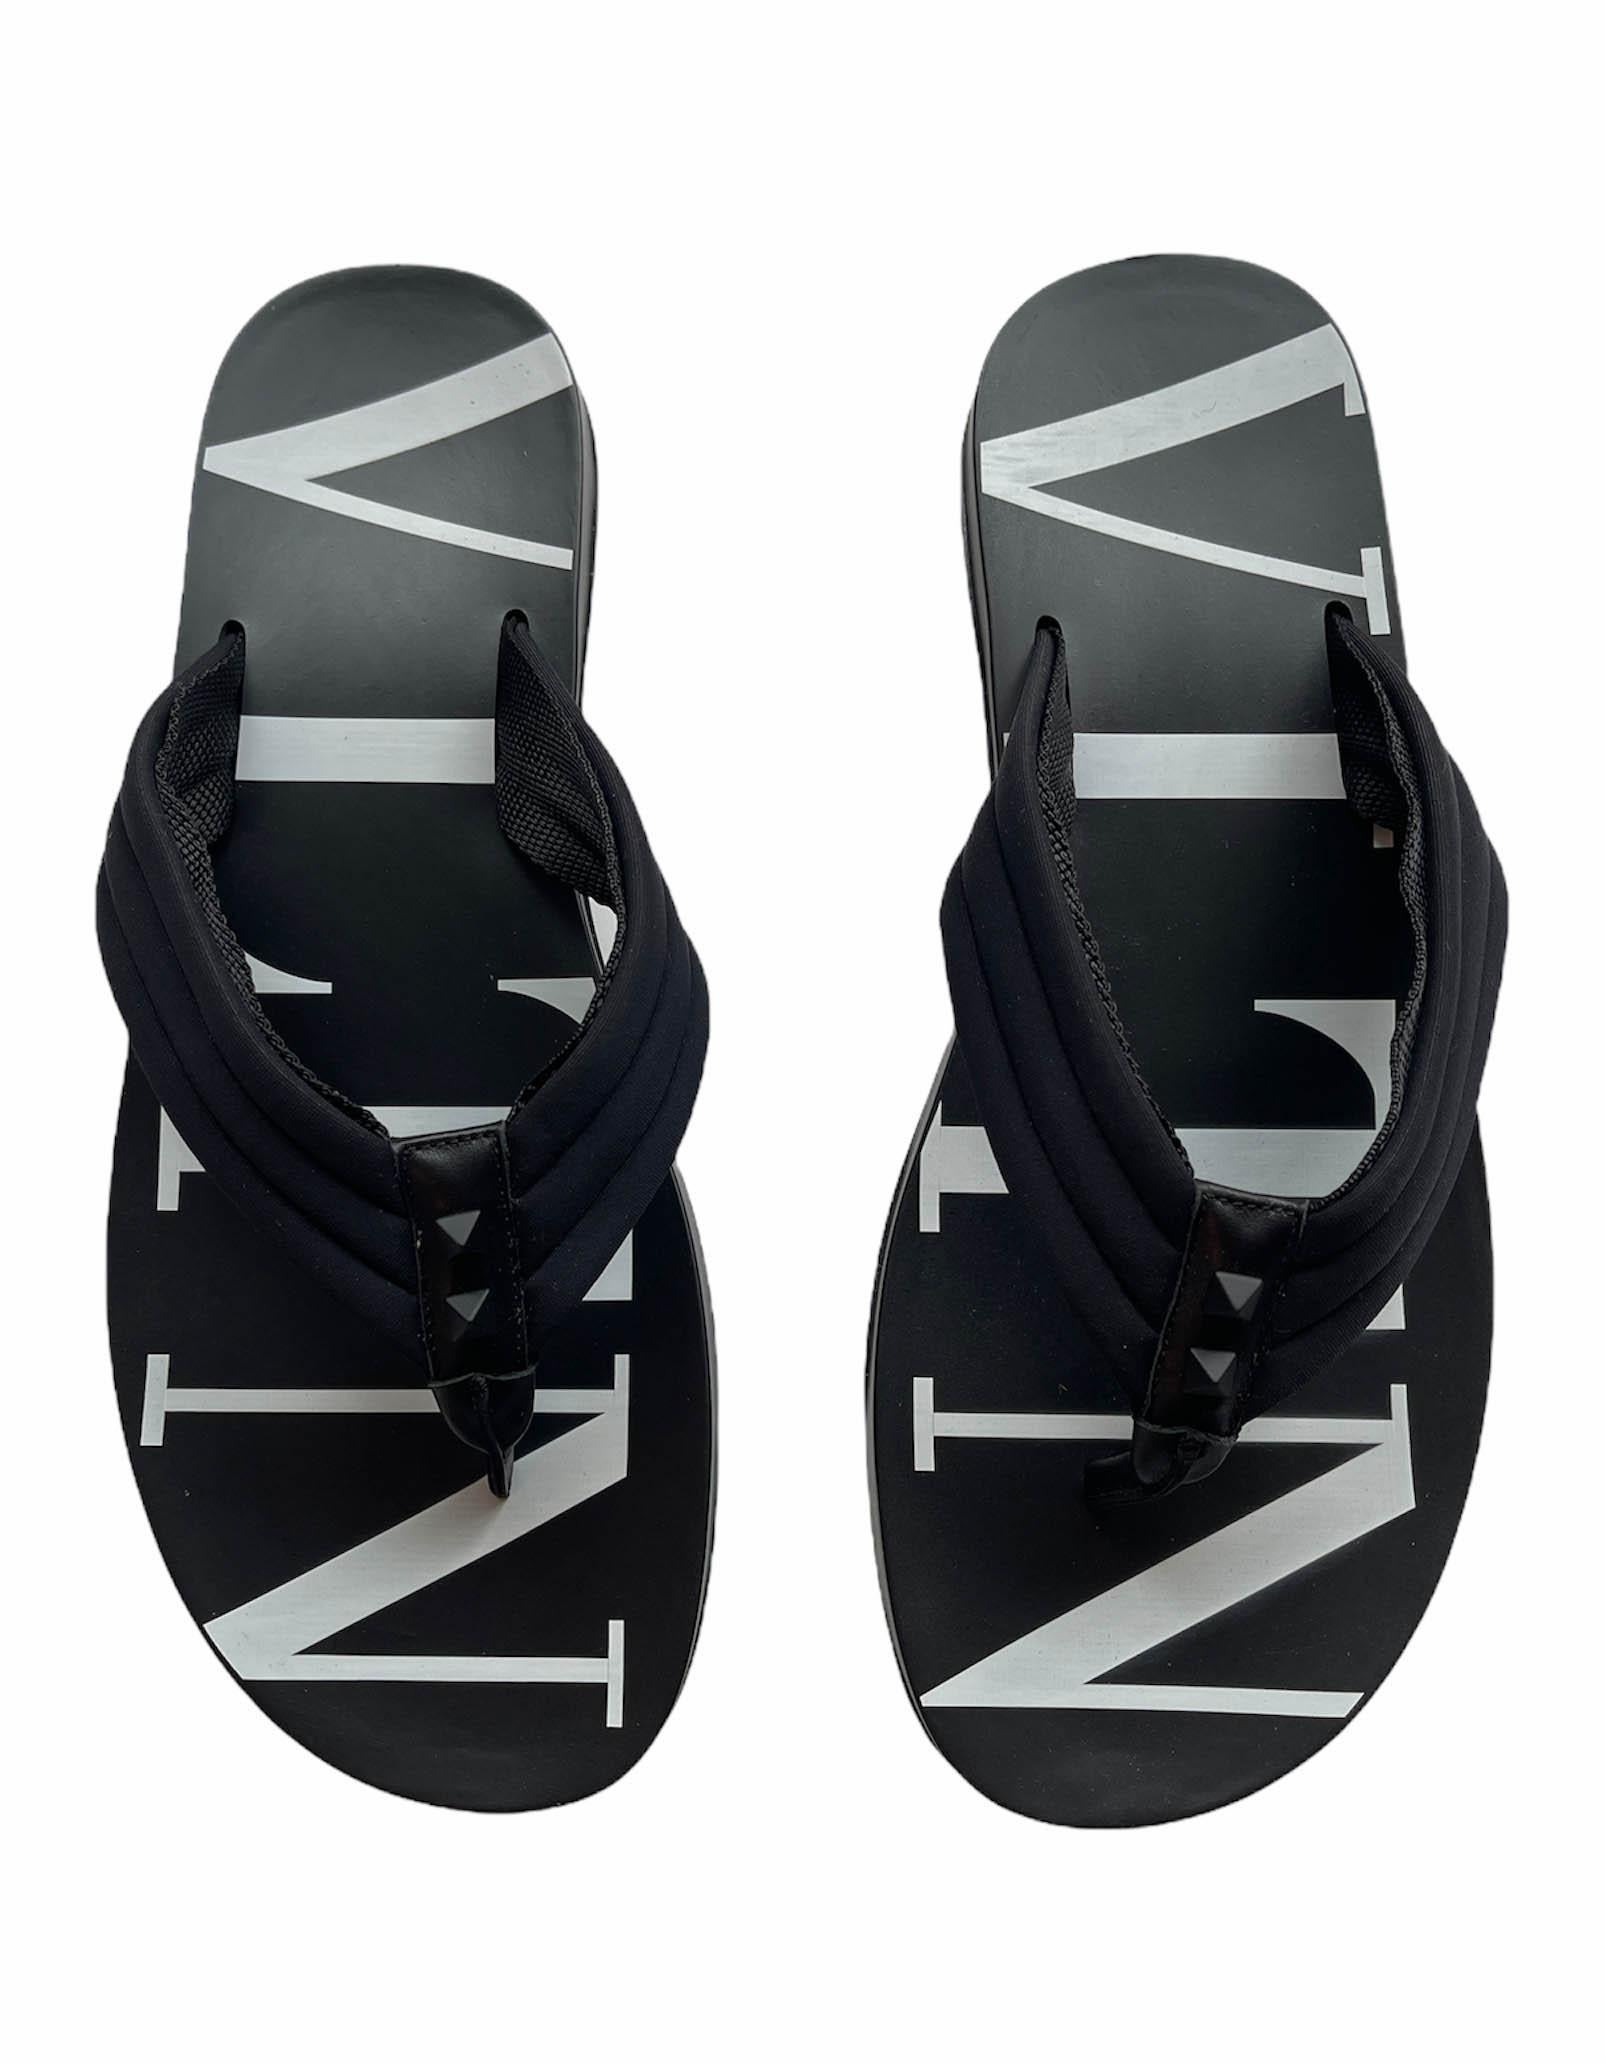 Valentino MEN'S Black/White VLTN Flip Flop Sandals sz 43

Made In: Italy
Year of Production: 2021
Color: Black and white
Closure/Opening: Slide on
Overall Condition: Like new
Estimated Retail: $375 plus tax


Marked Size: 43
Platform Height: .85